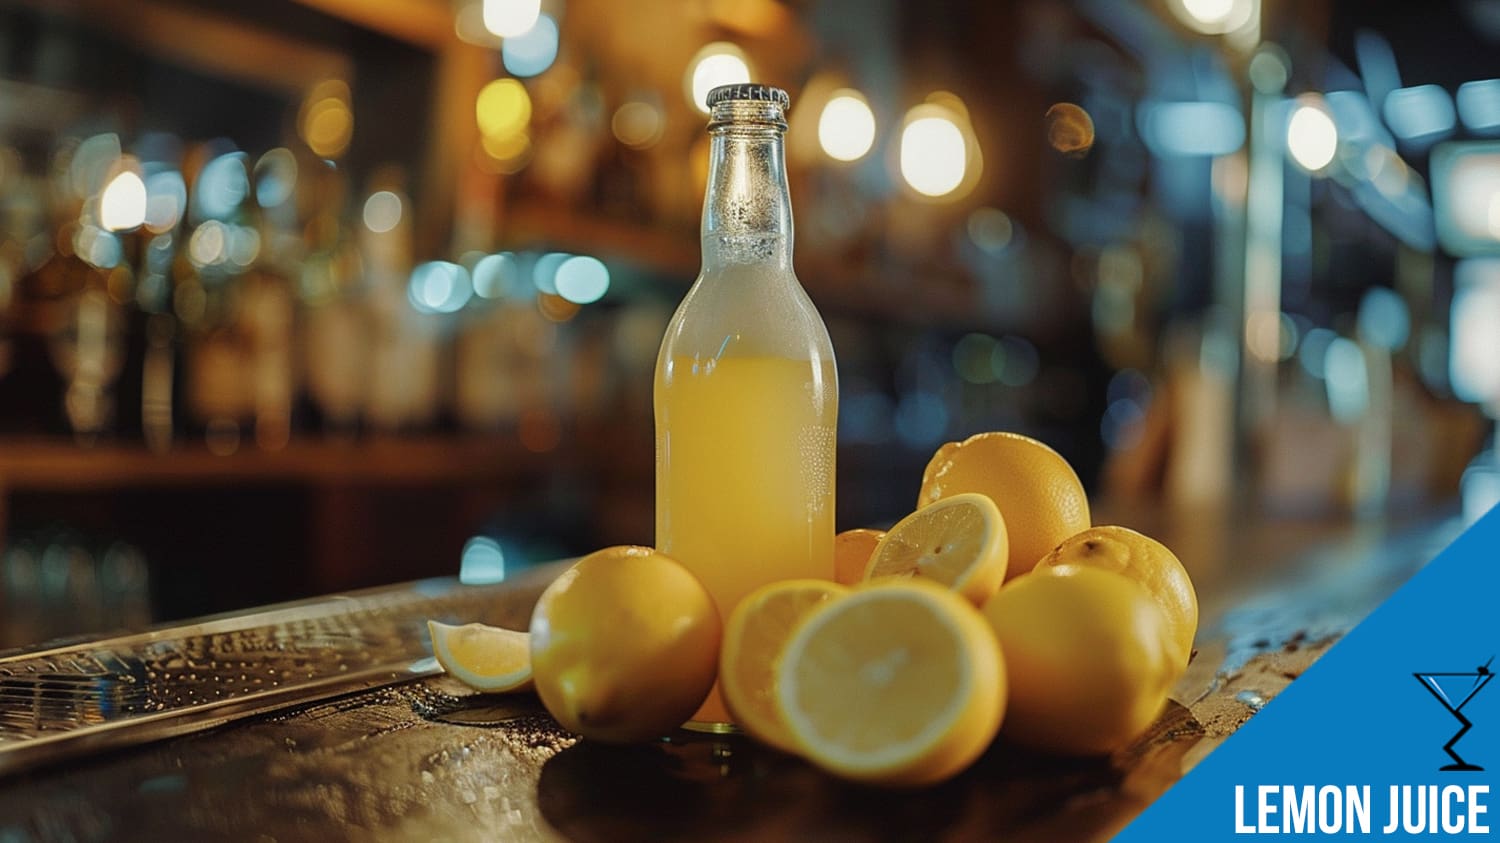 Discover the versatility of lemon juice in cocktails. Learn how to use lemon juice as a mixer to create delicious and refreshing drinks that will impress your guests.